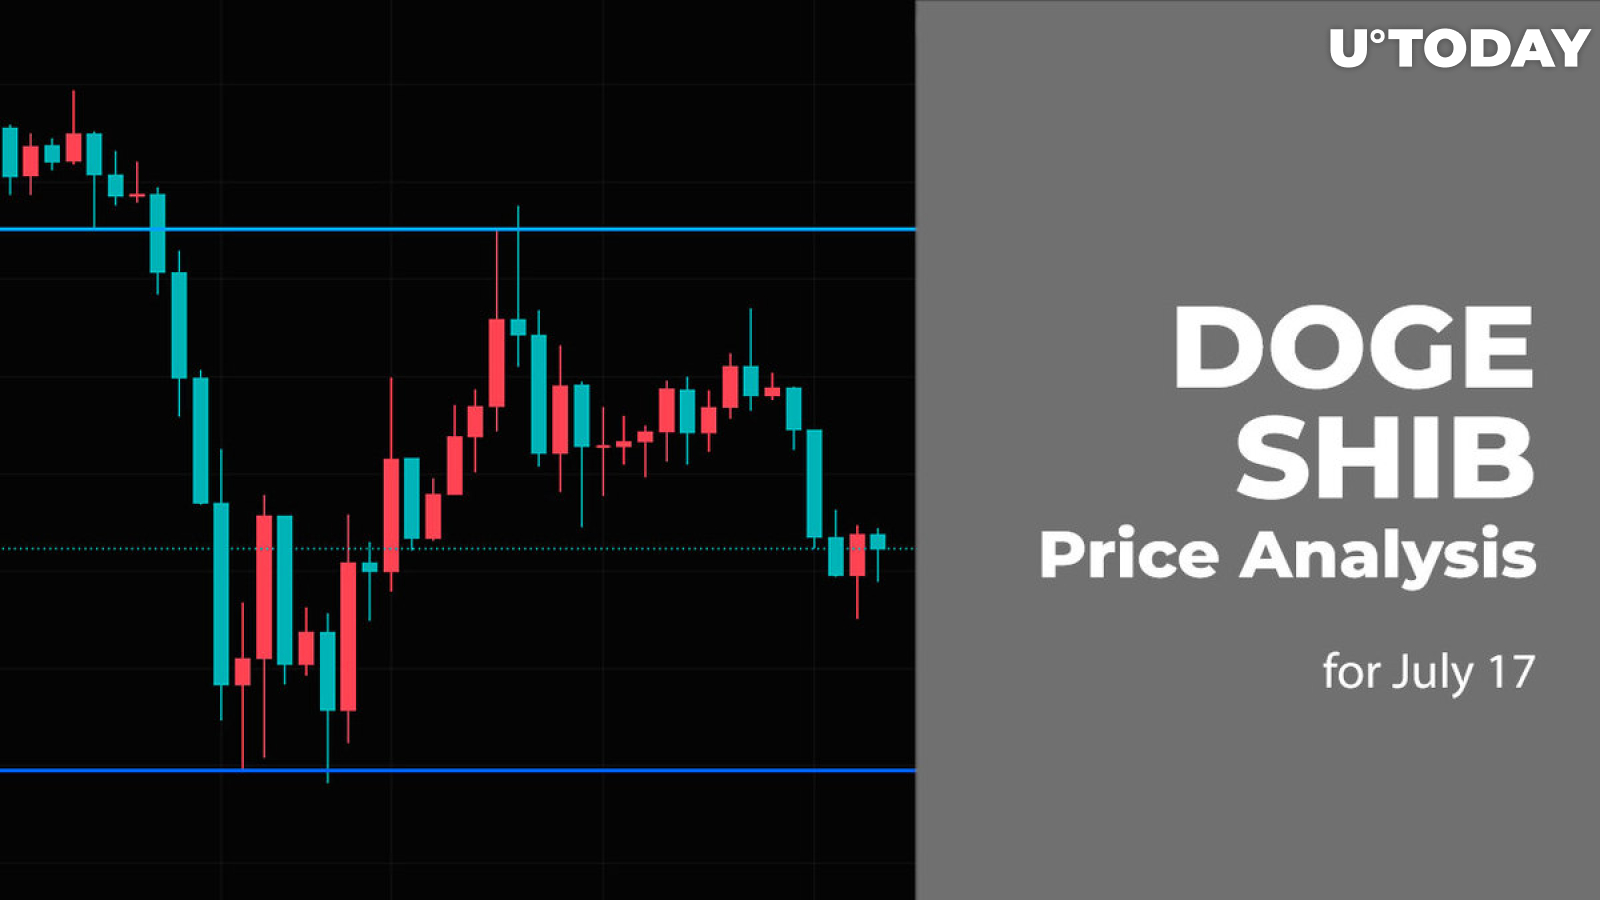 DOGE and SHIB Price Analysis for July 17